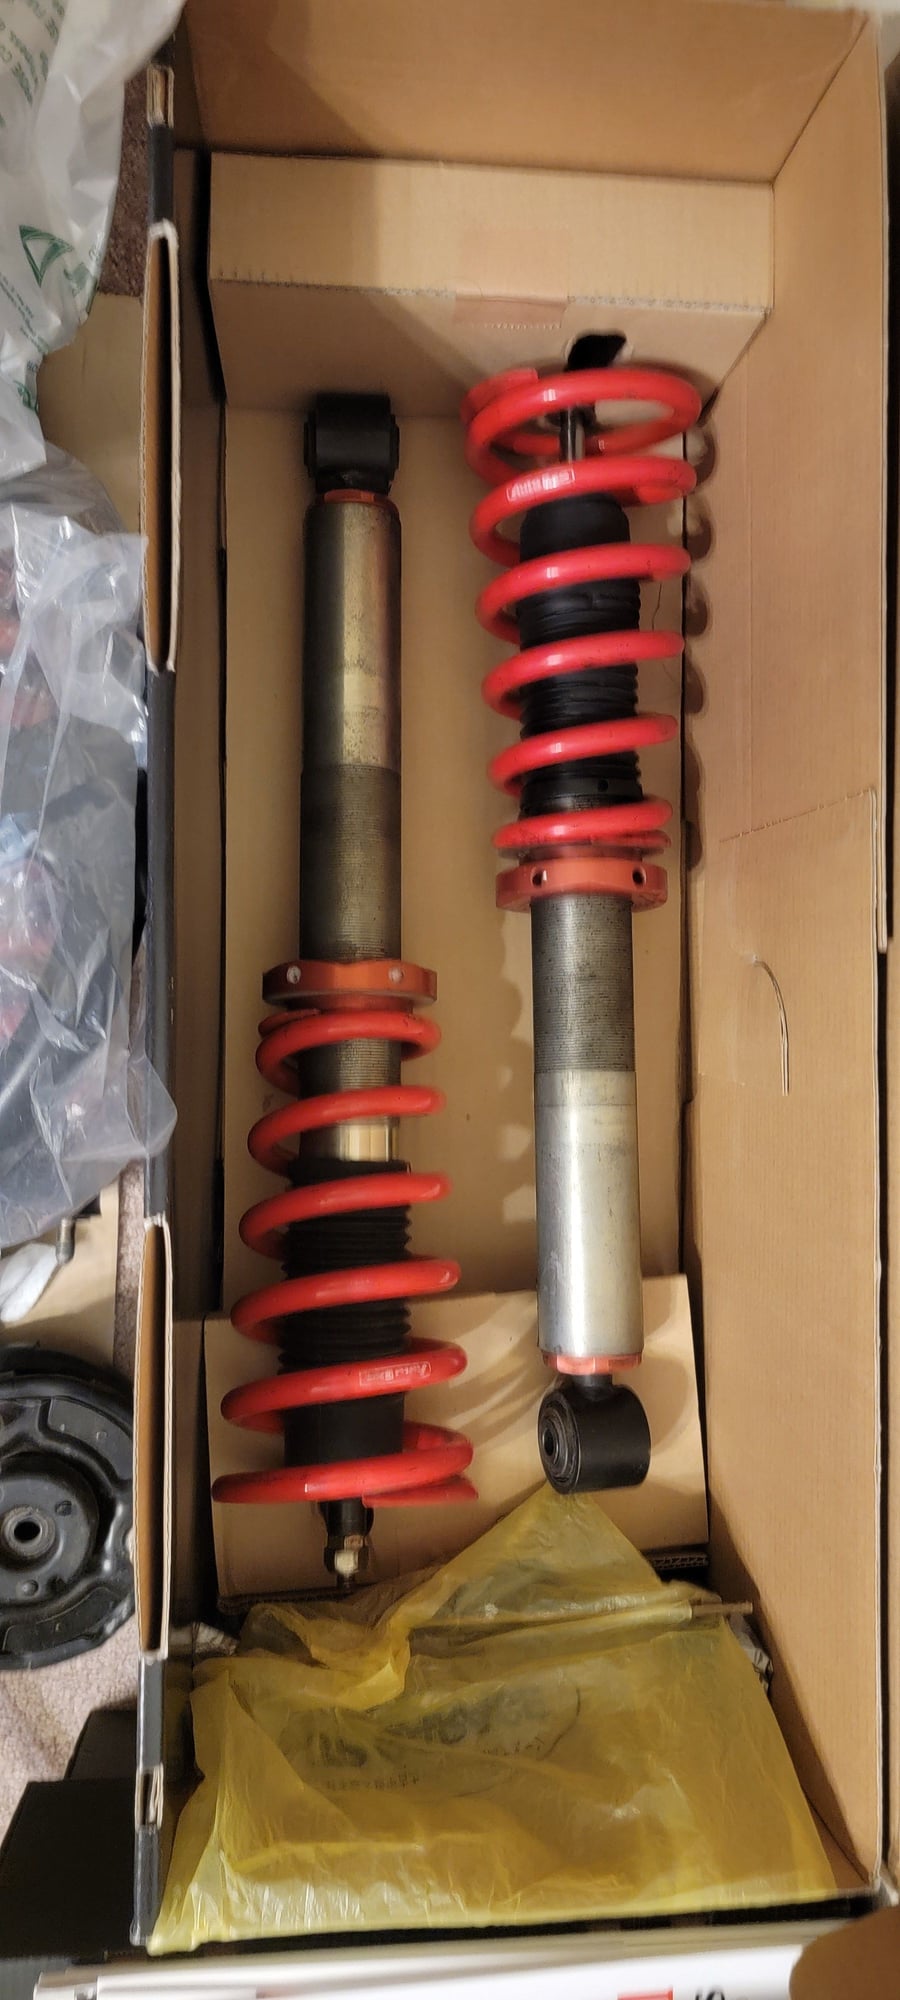 Steering/Suspension - FS: AutoExe coilovers, D2 Racing coilovers, Twin Turbo intake - Used - 0  All Models - Portland, OR 97216, United States